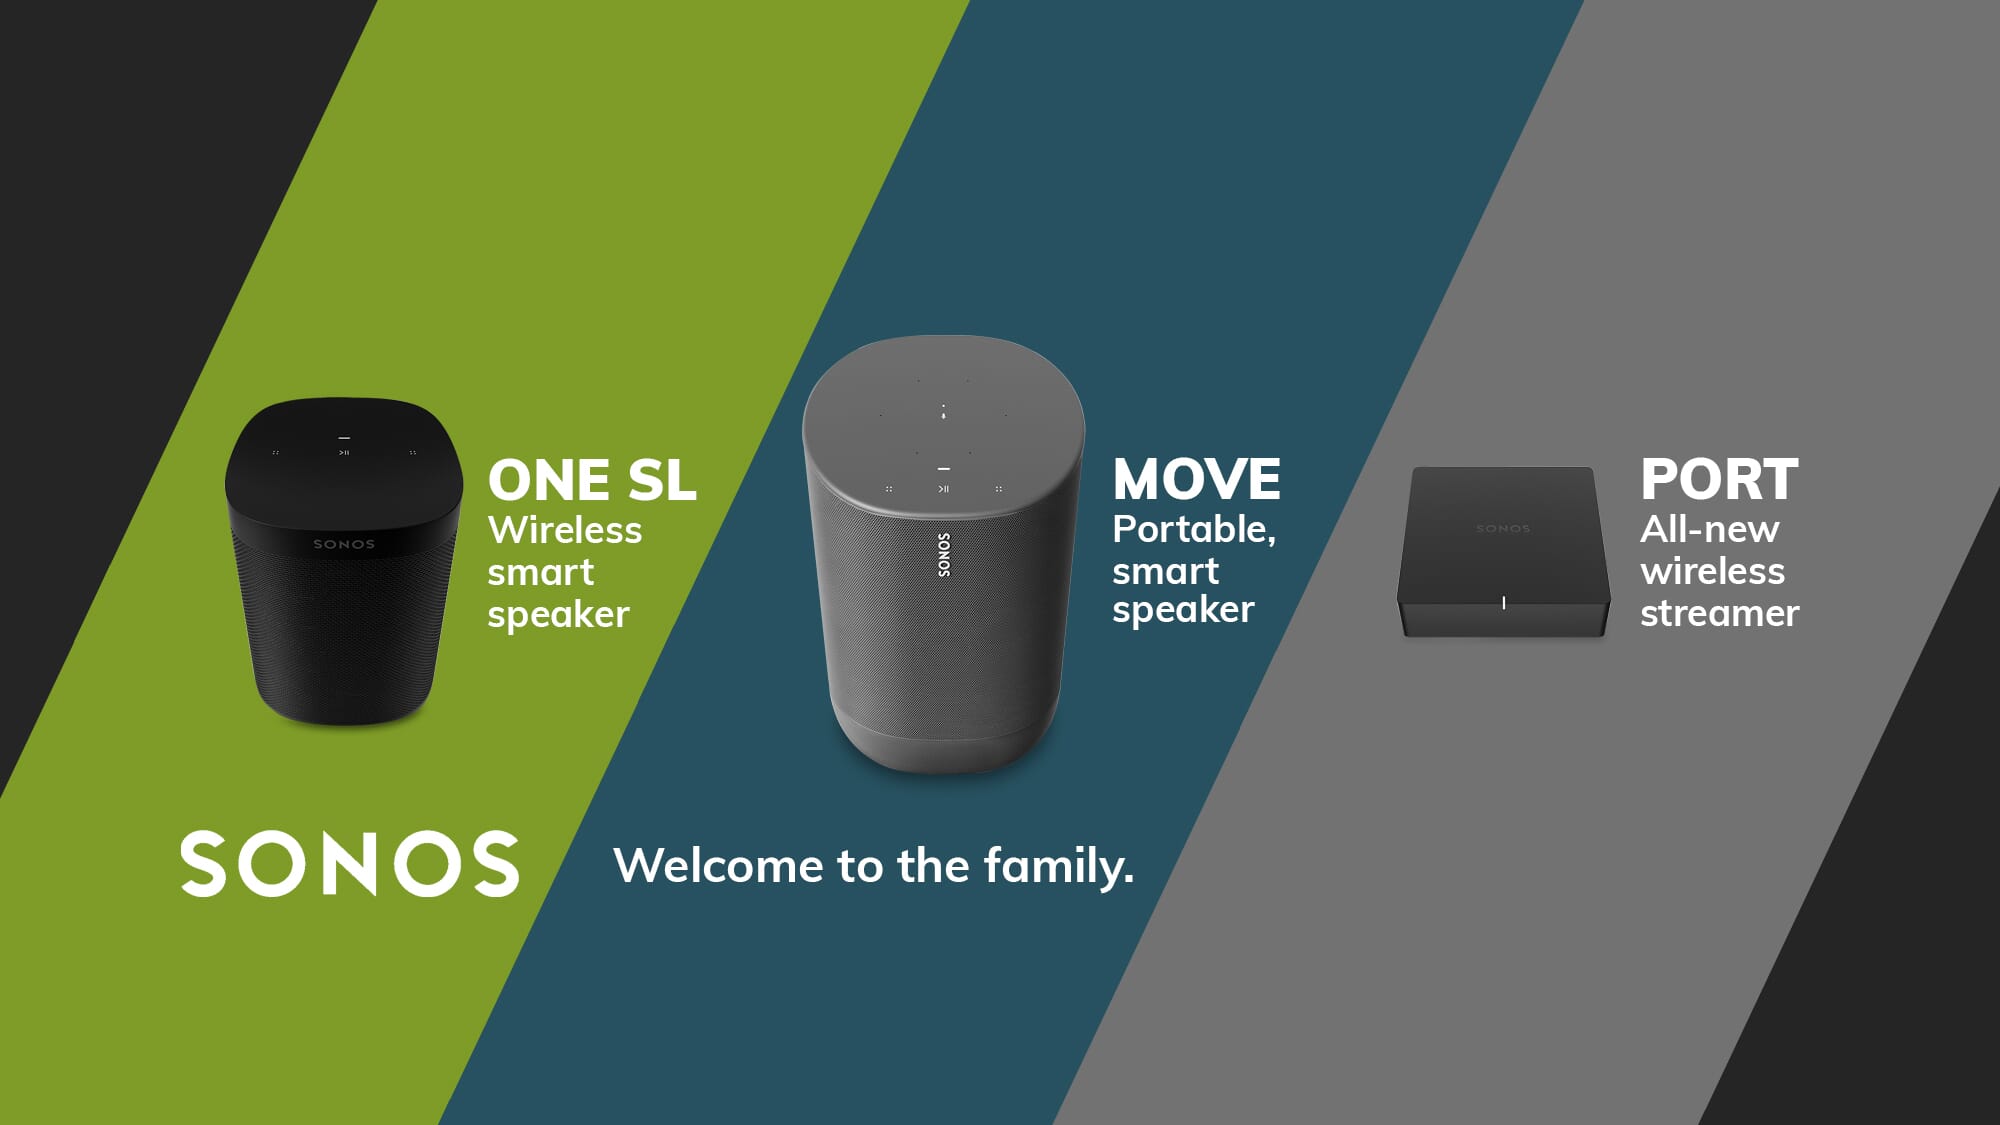 Sonos Release 3 New Products for 2019 